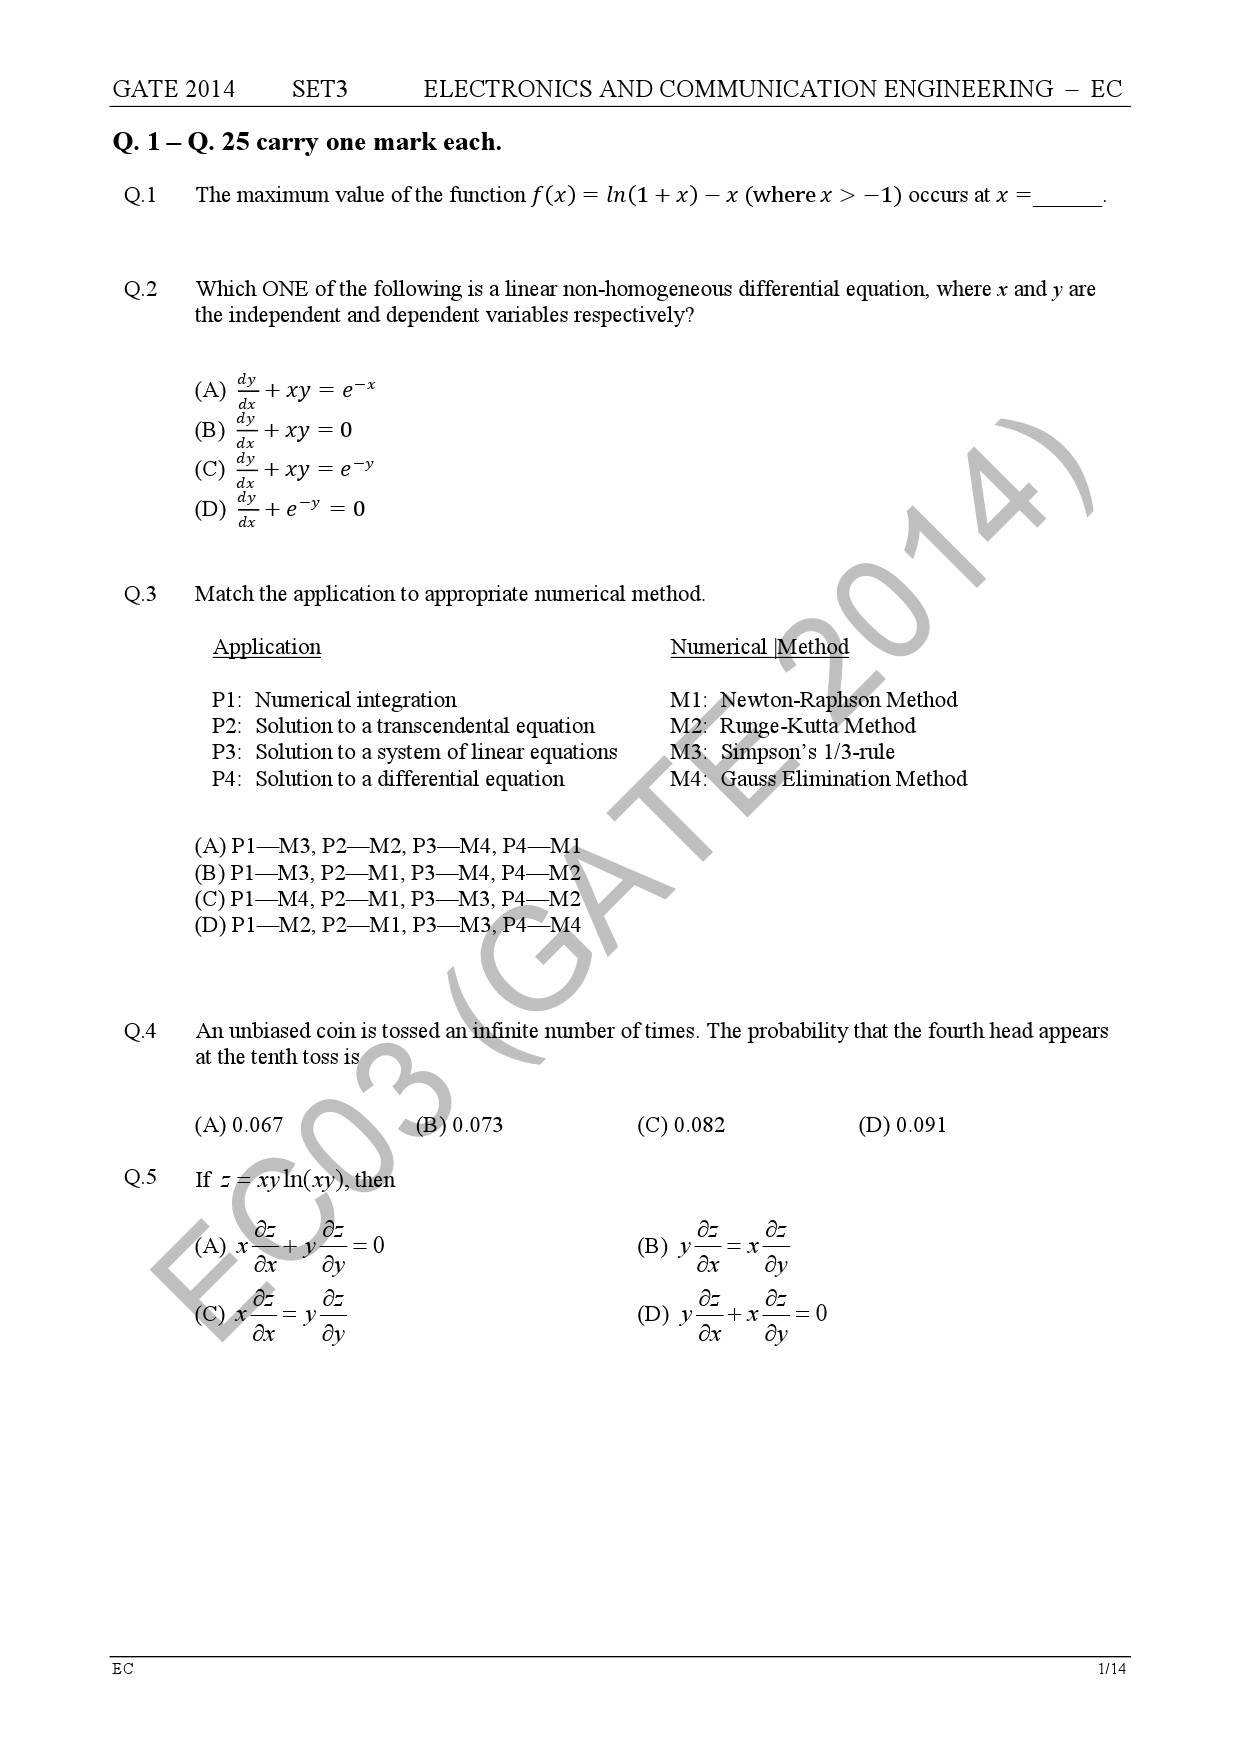 GATE Exam Question Paper 2014 Electronics and Communication Engineering Set 3 8